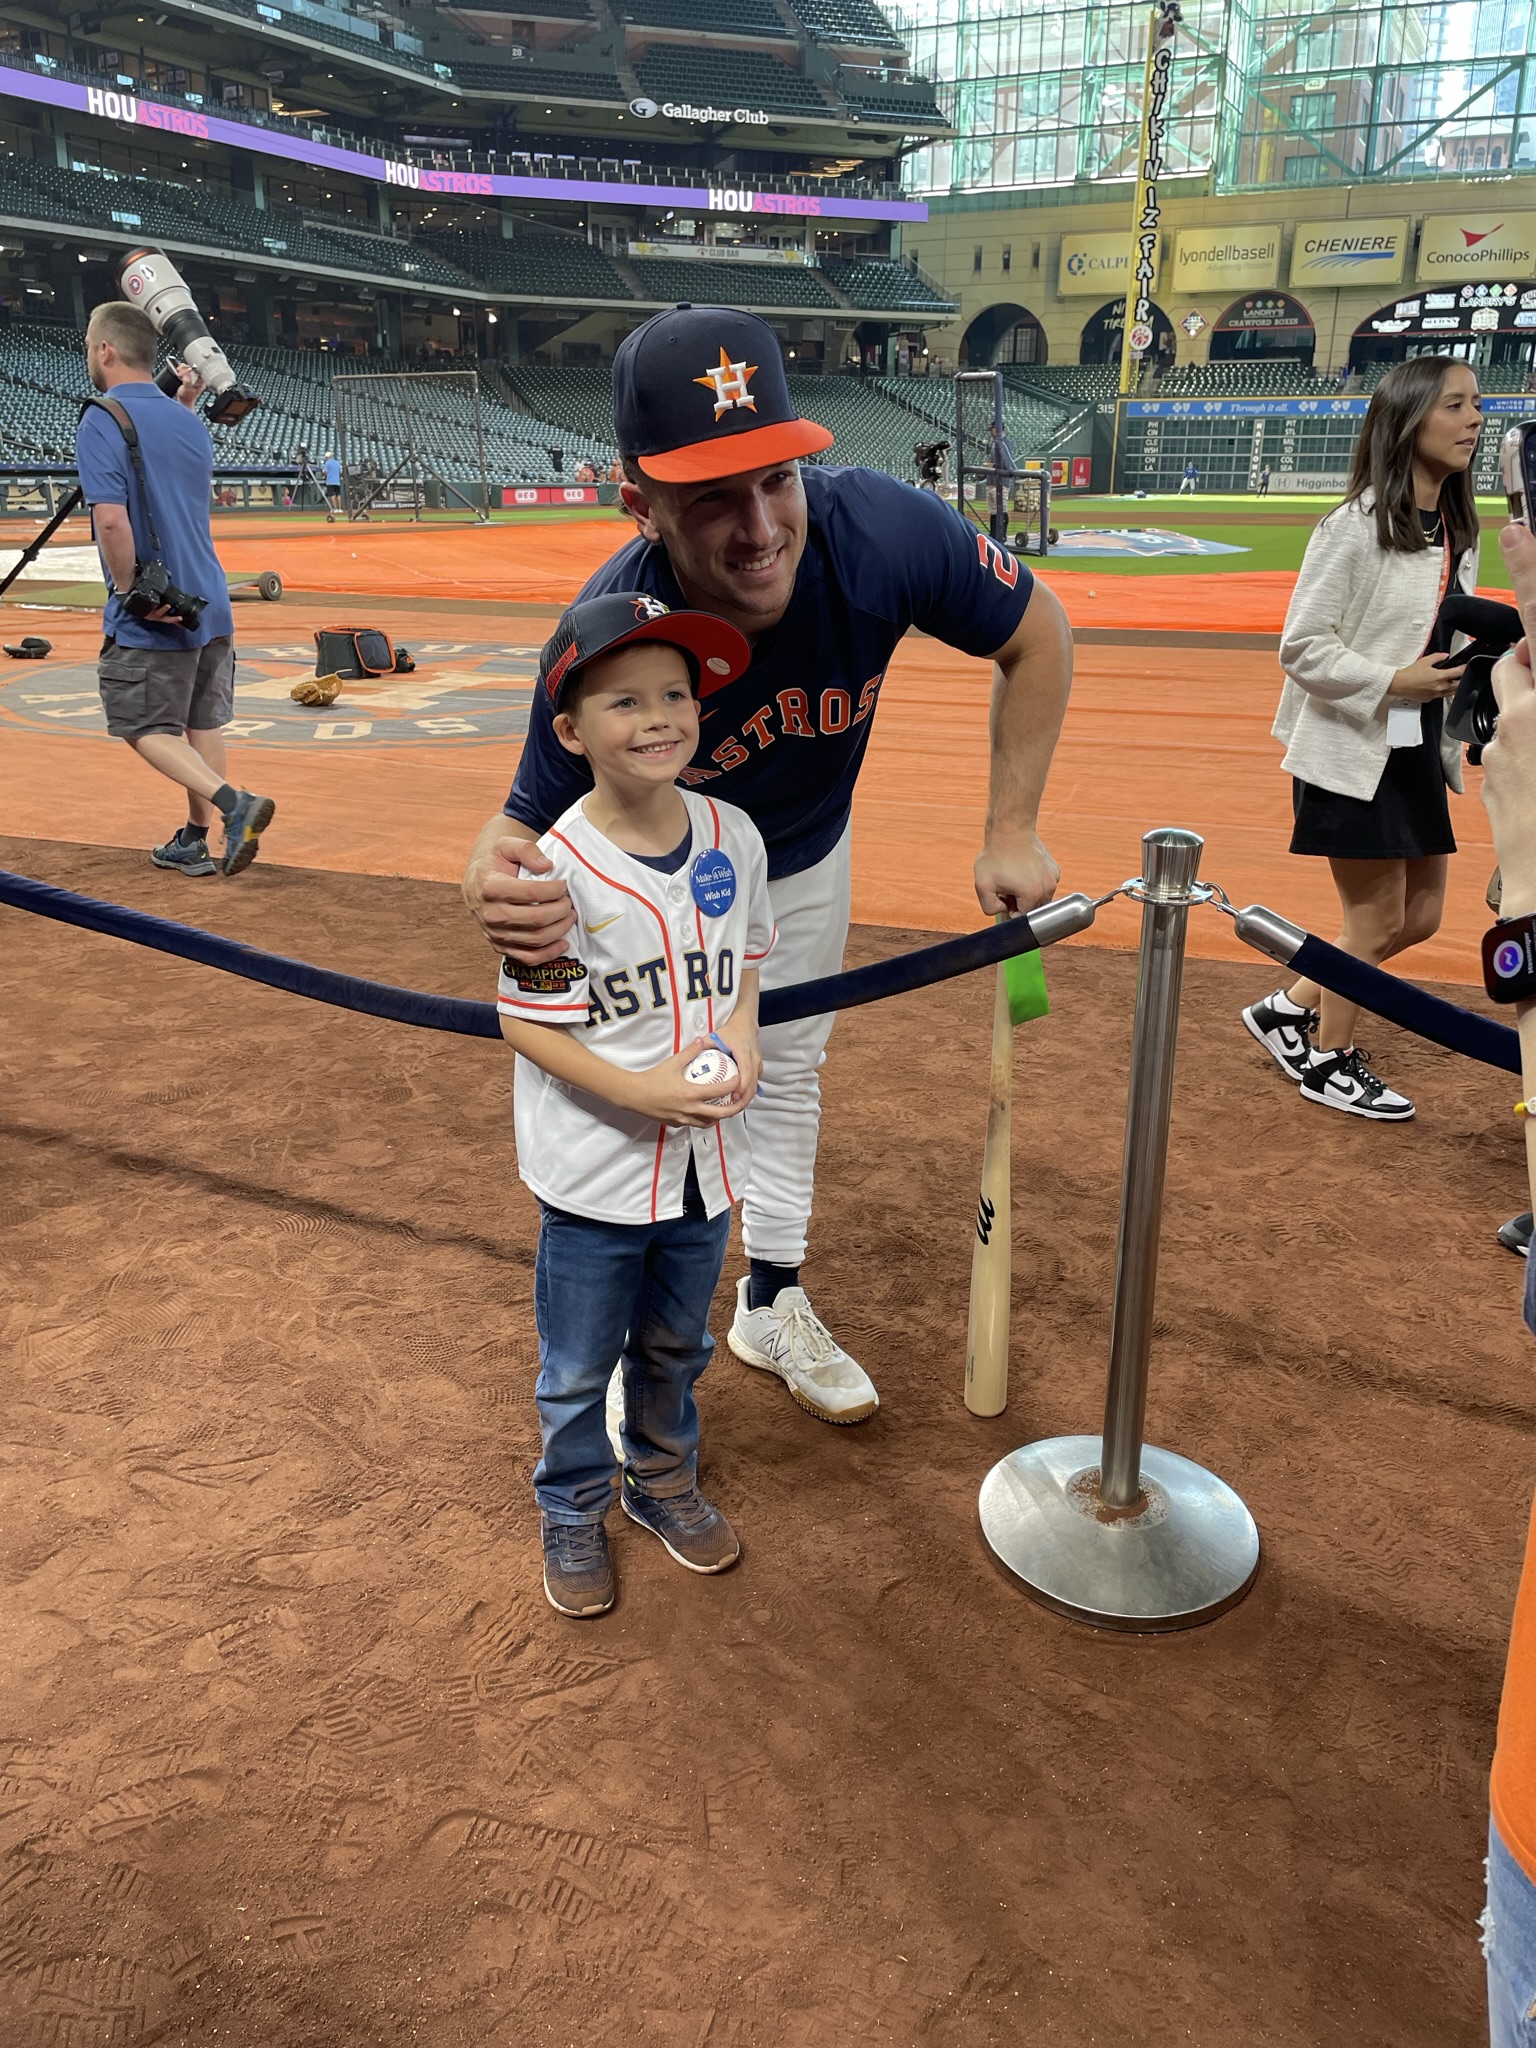 Astros giving free tickets to those who donate to help Louisiana